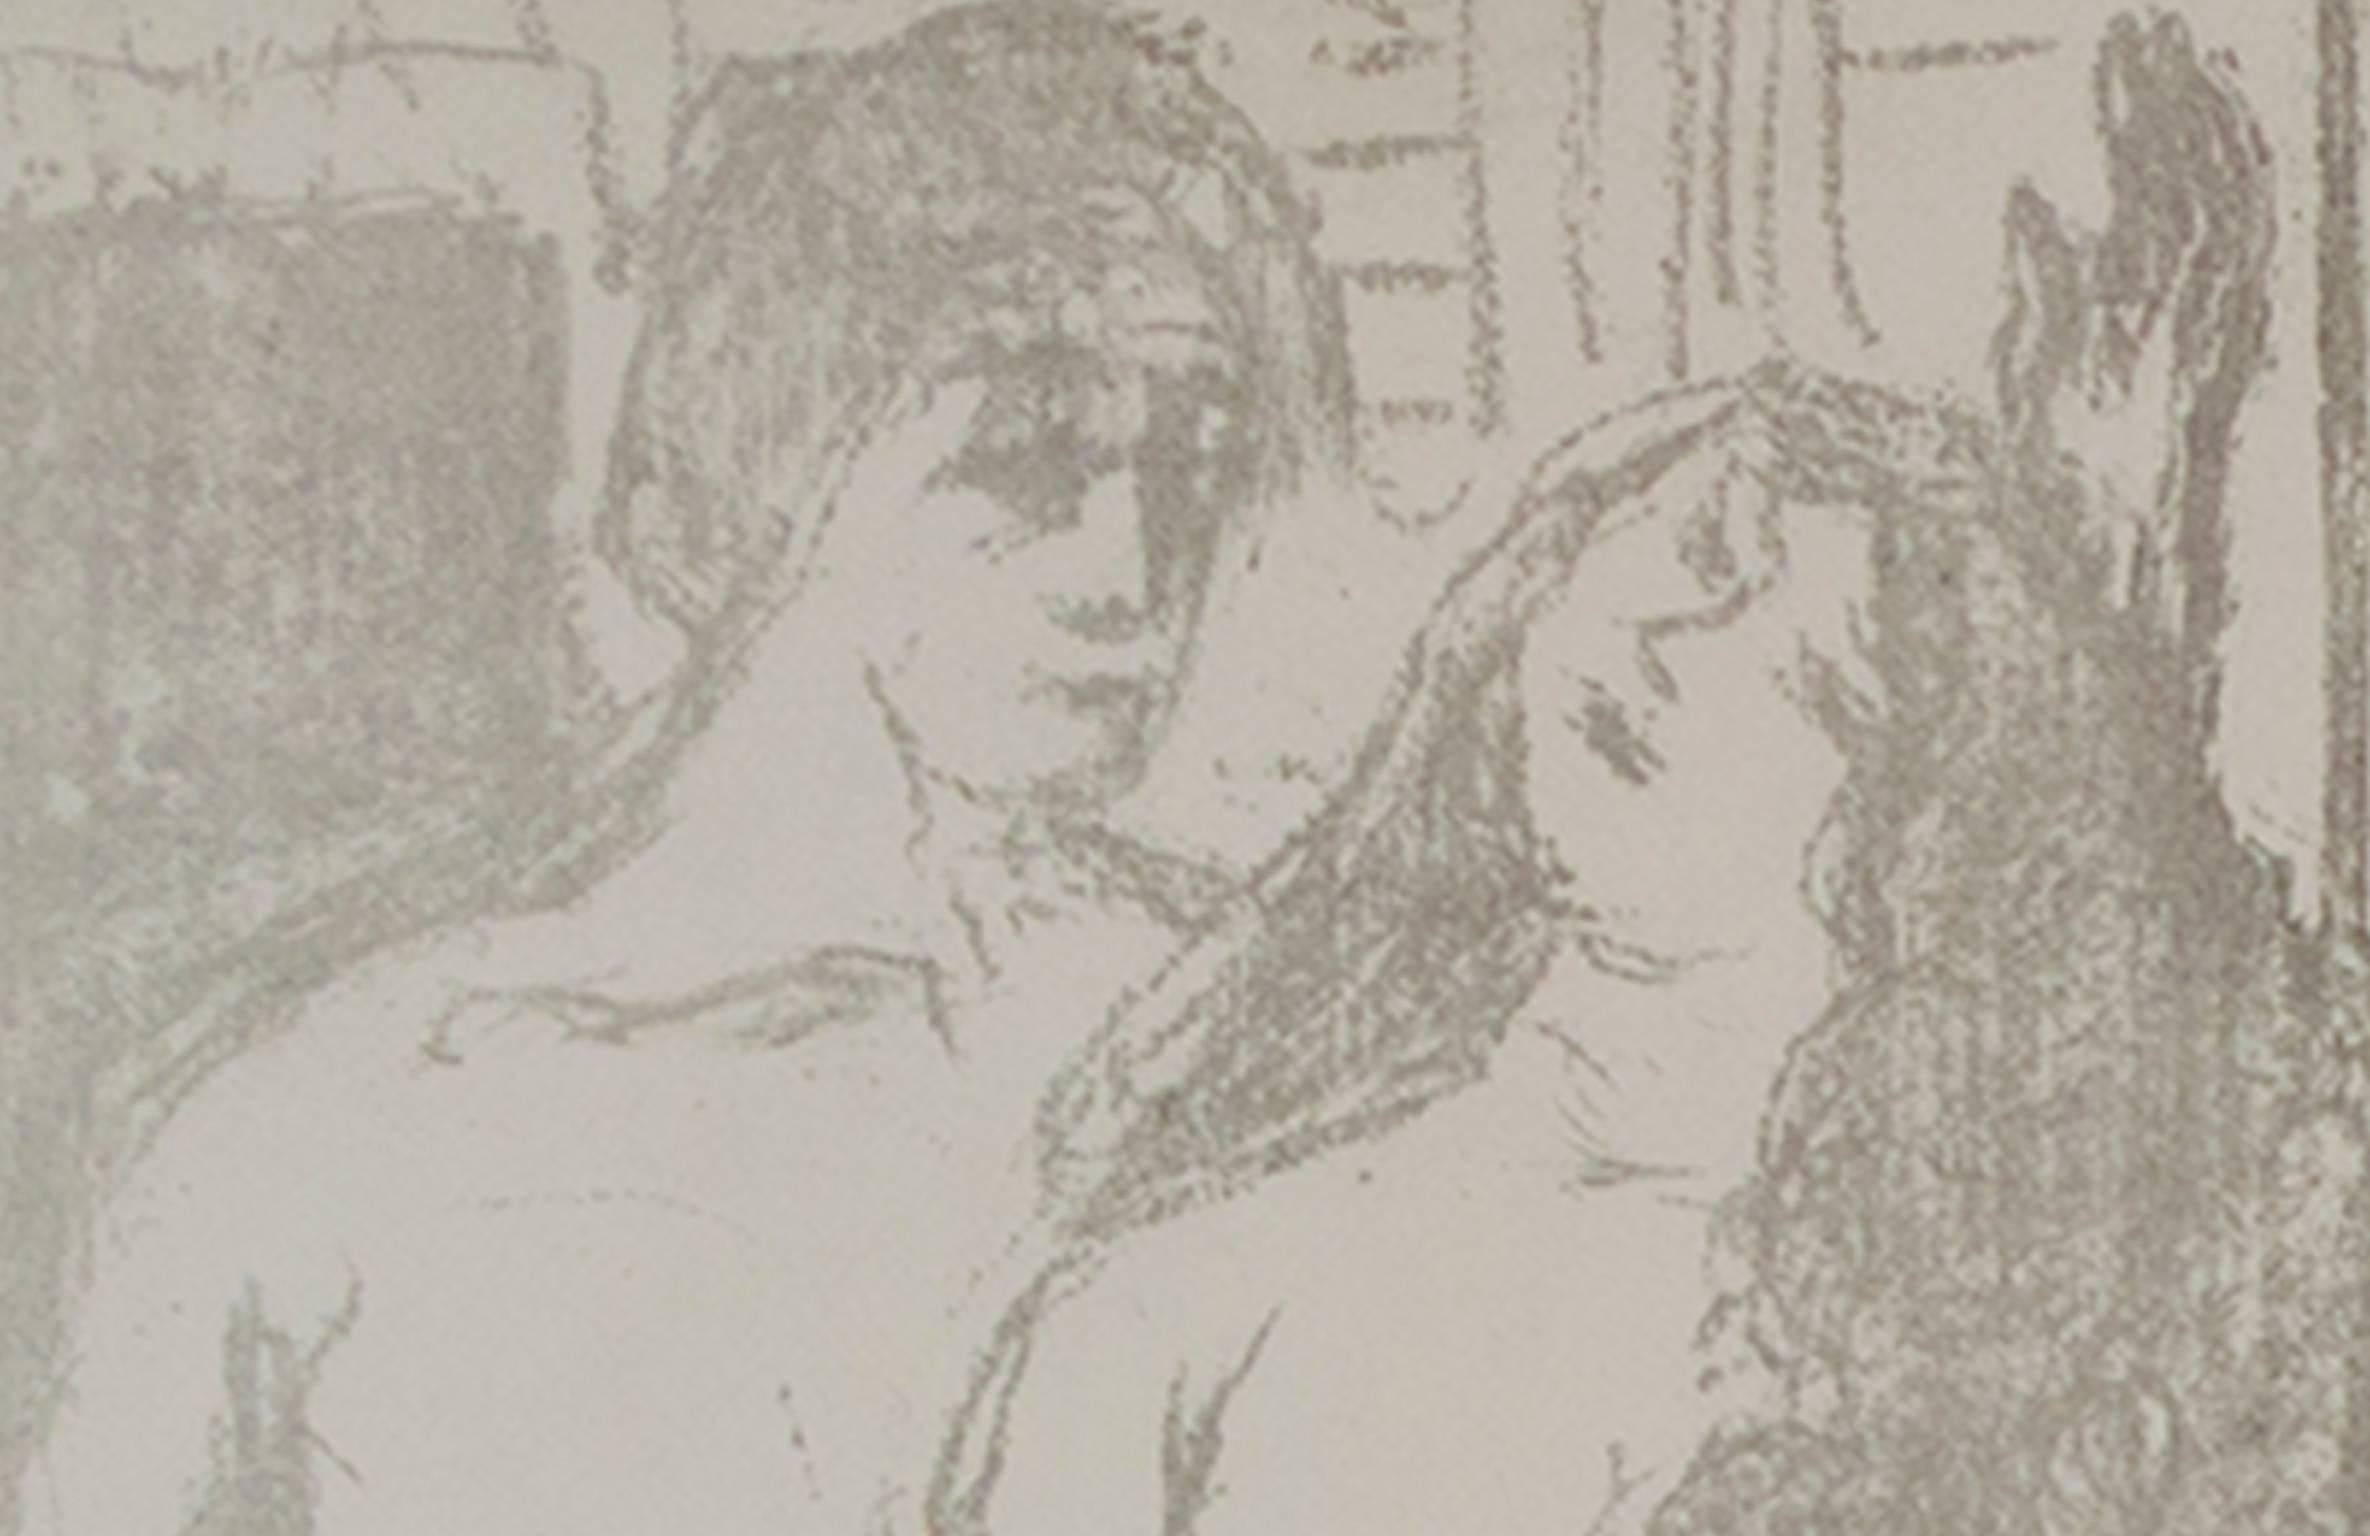 Late 19th century lithograph nude figures faces hair - Gray Figurative Print by Pierre Bonnard